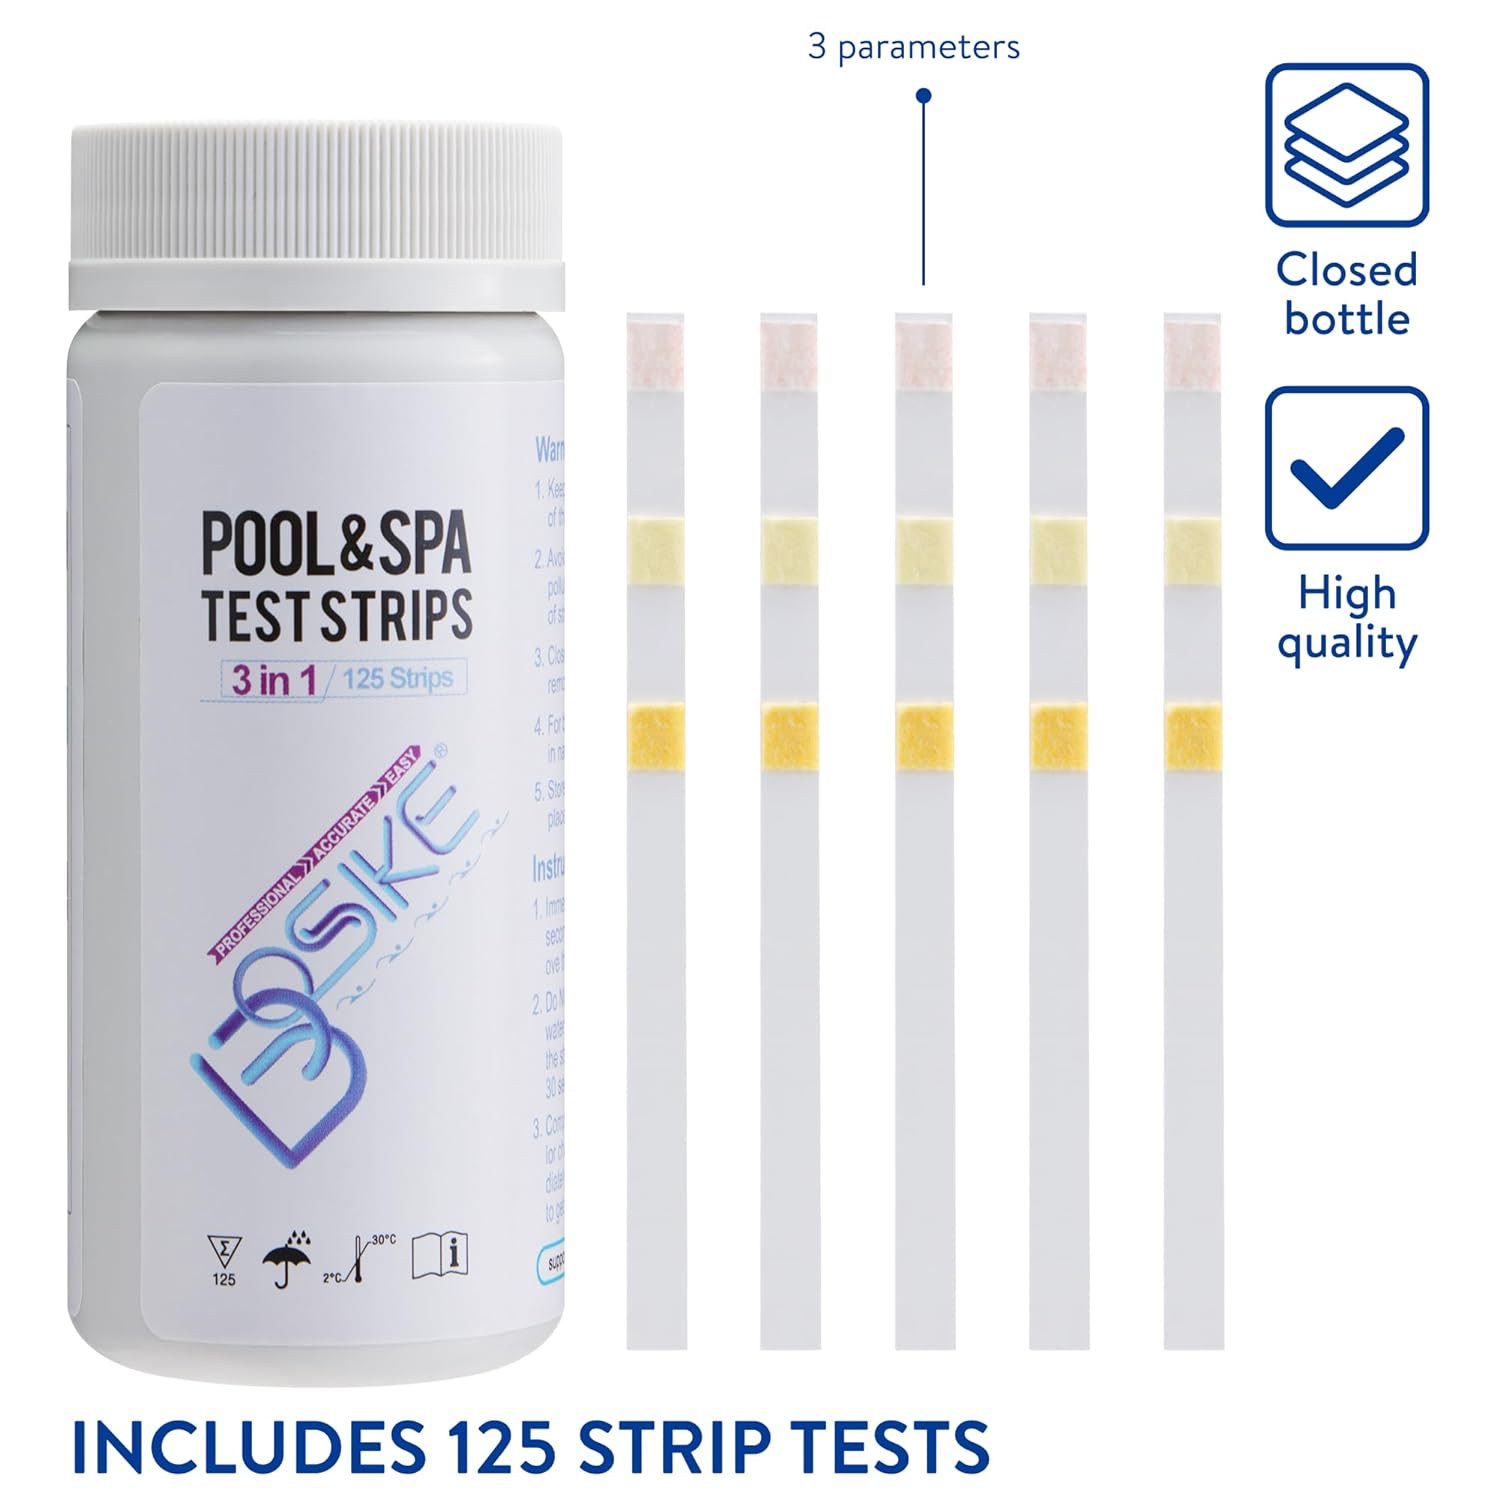 BOSIKE 3 in 1 Hot Tub Test Strips - 125 ct - Water Testing Kit for Swimming Pool & Spa - Tester for Alkalinity, Free Chlorine Bromine & pH Pool Test Strips 3 in 1